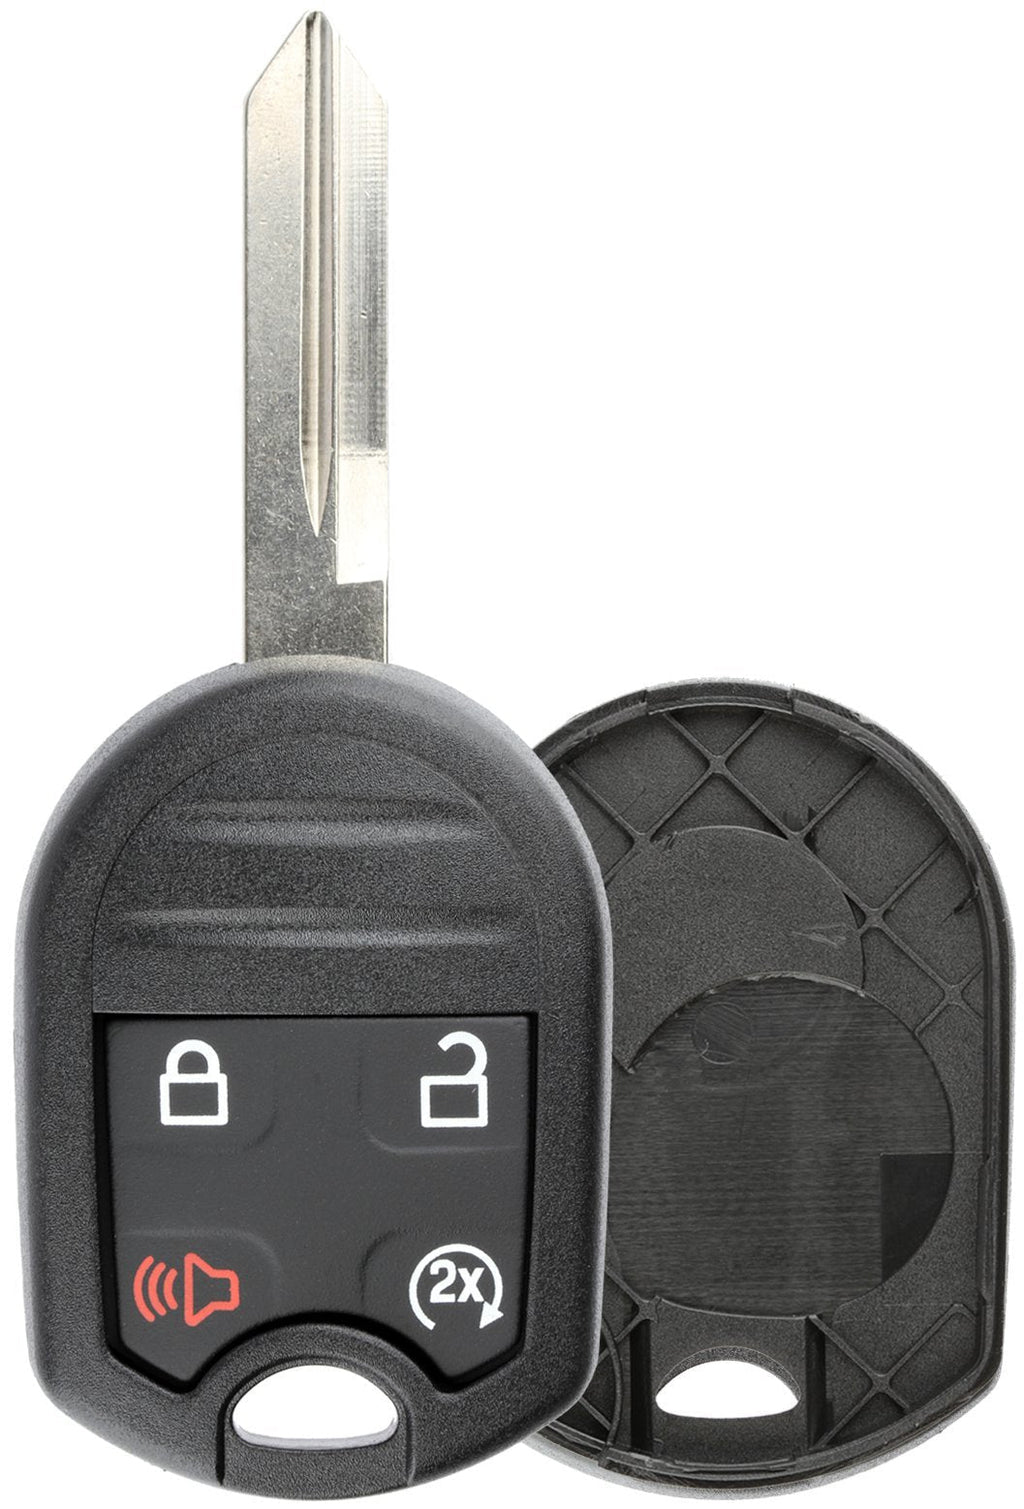  [AUSTRALIA] - KeylessOption Keyless Entry Remote Uncut Blank Ignition Key Blade Fob Shell Case Cover Buttons for F-150 F-250 Explorer Edge